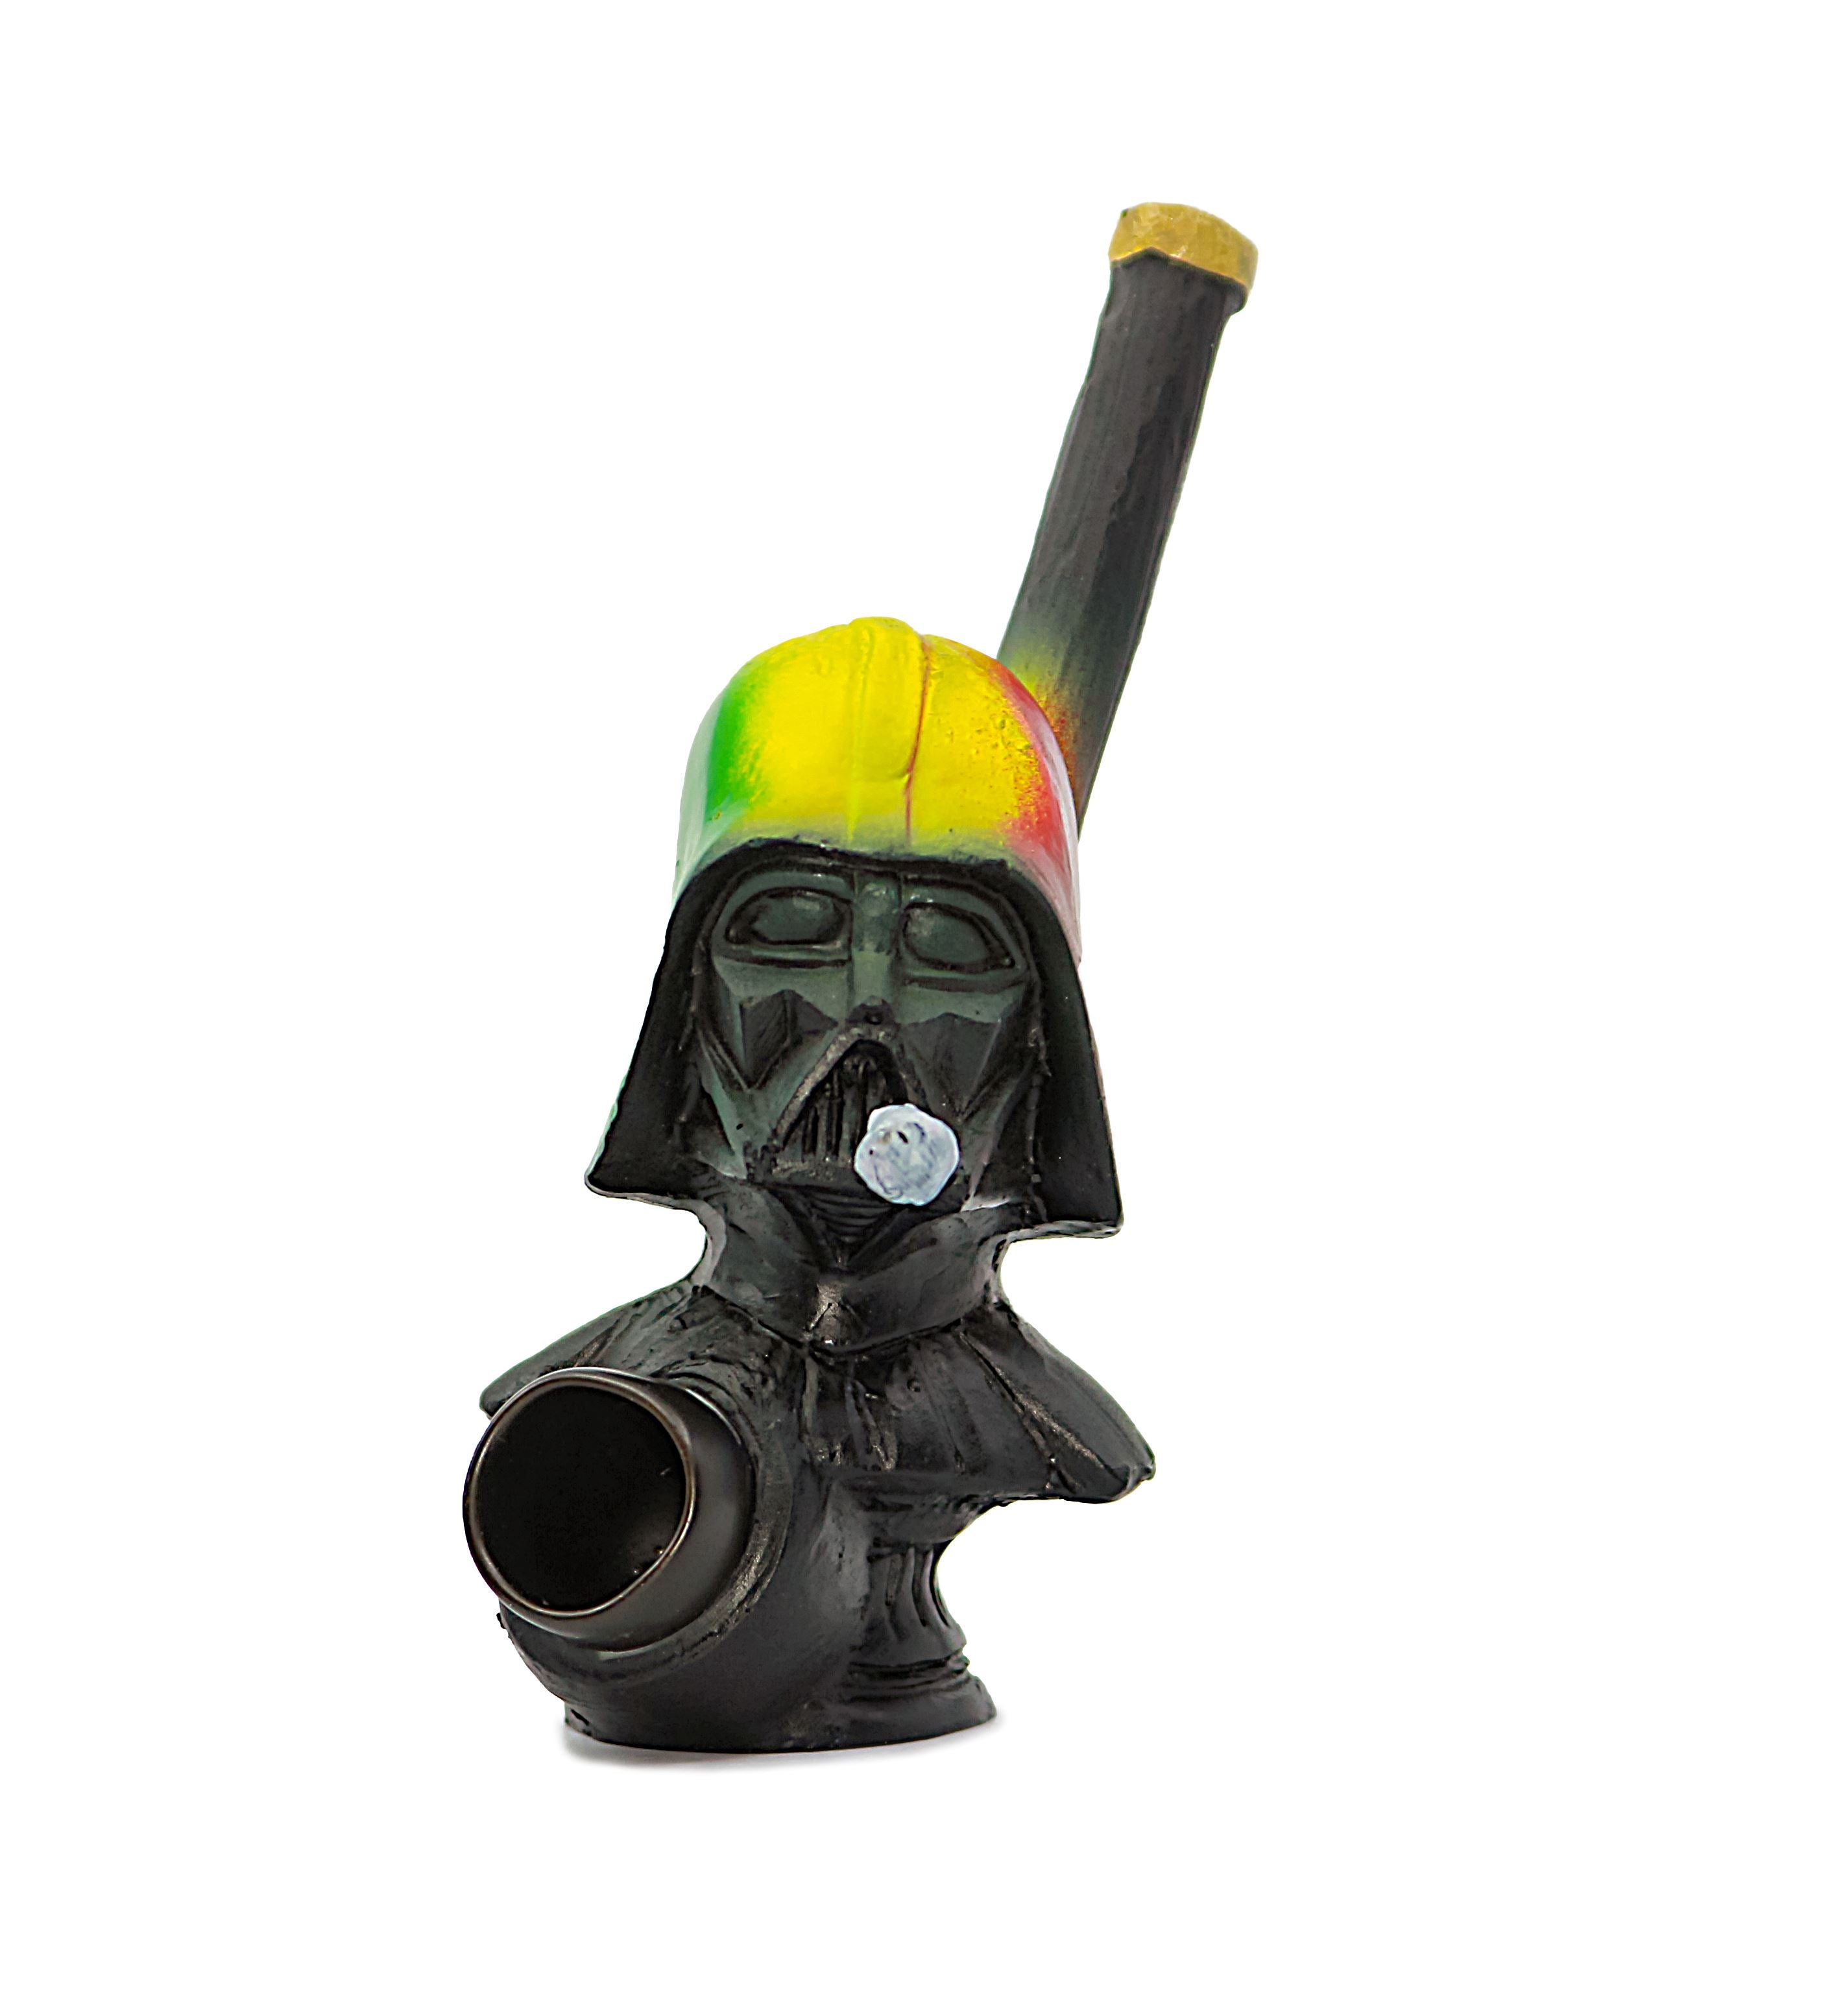 Resin Pipe - Rasta Space Villain Pipes Puff Wholesale 